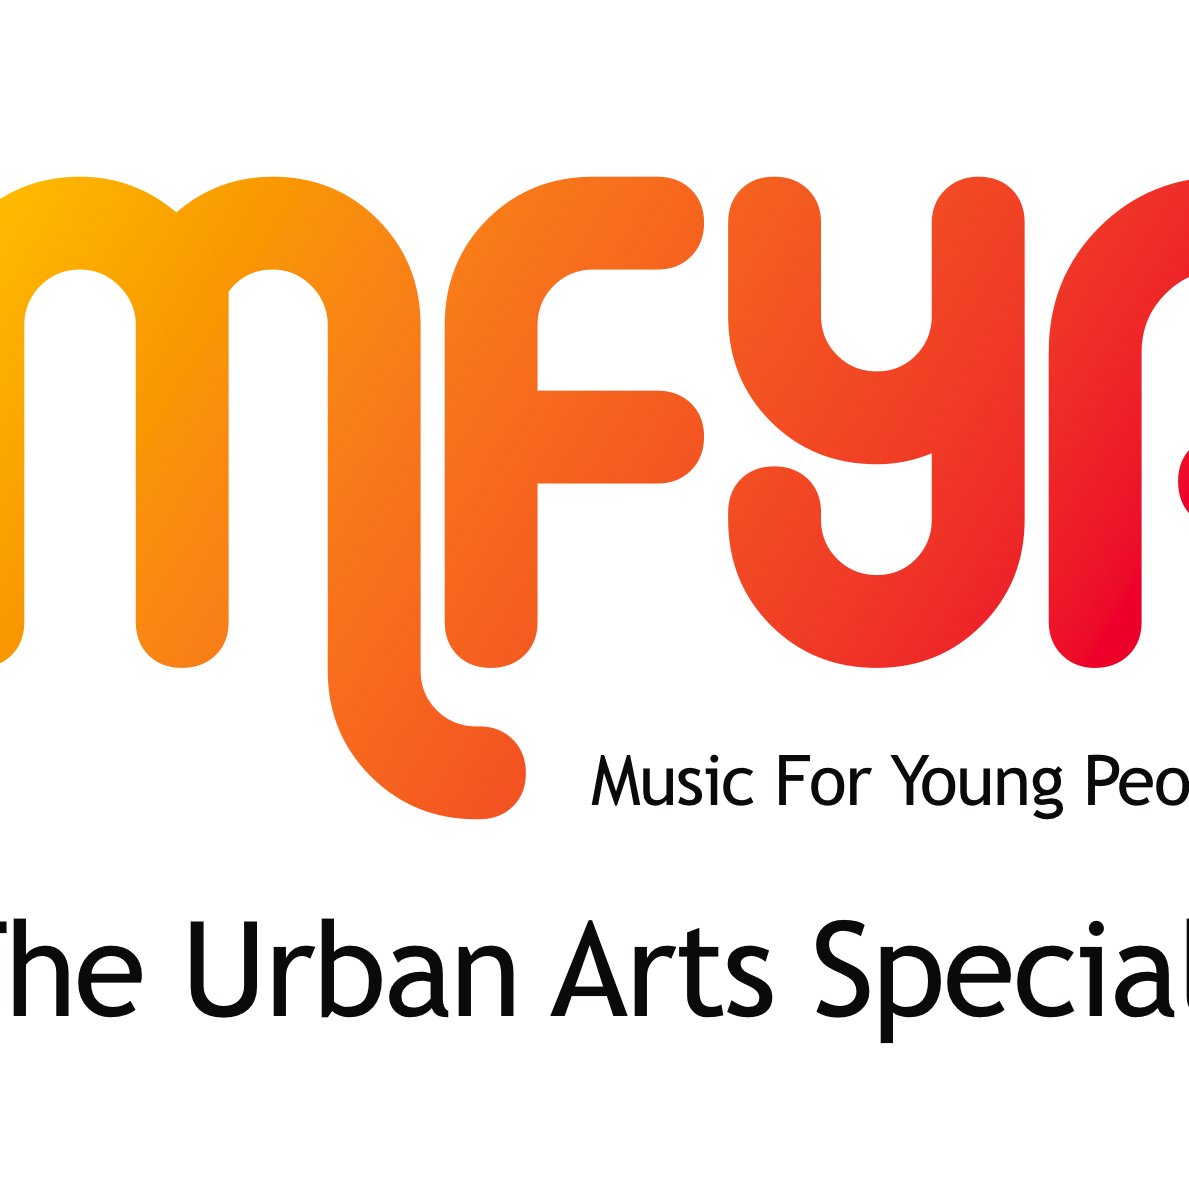 The Urban Art Specialists & provider of informal education to children, young people & adults. DJIng, Mentoring, Graffiti art, 1-1 Tutoring, Holiday Club + More